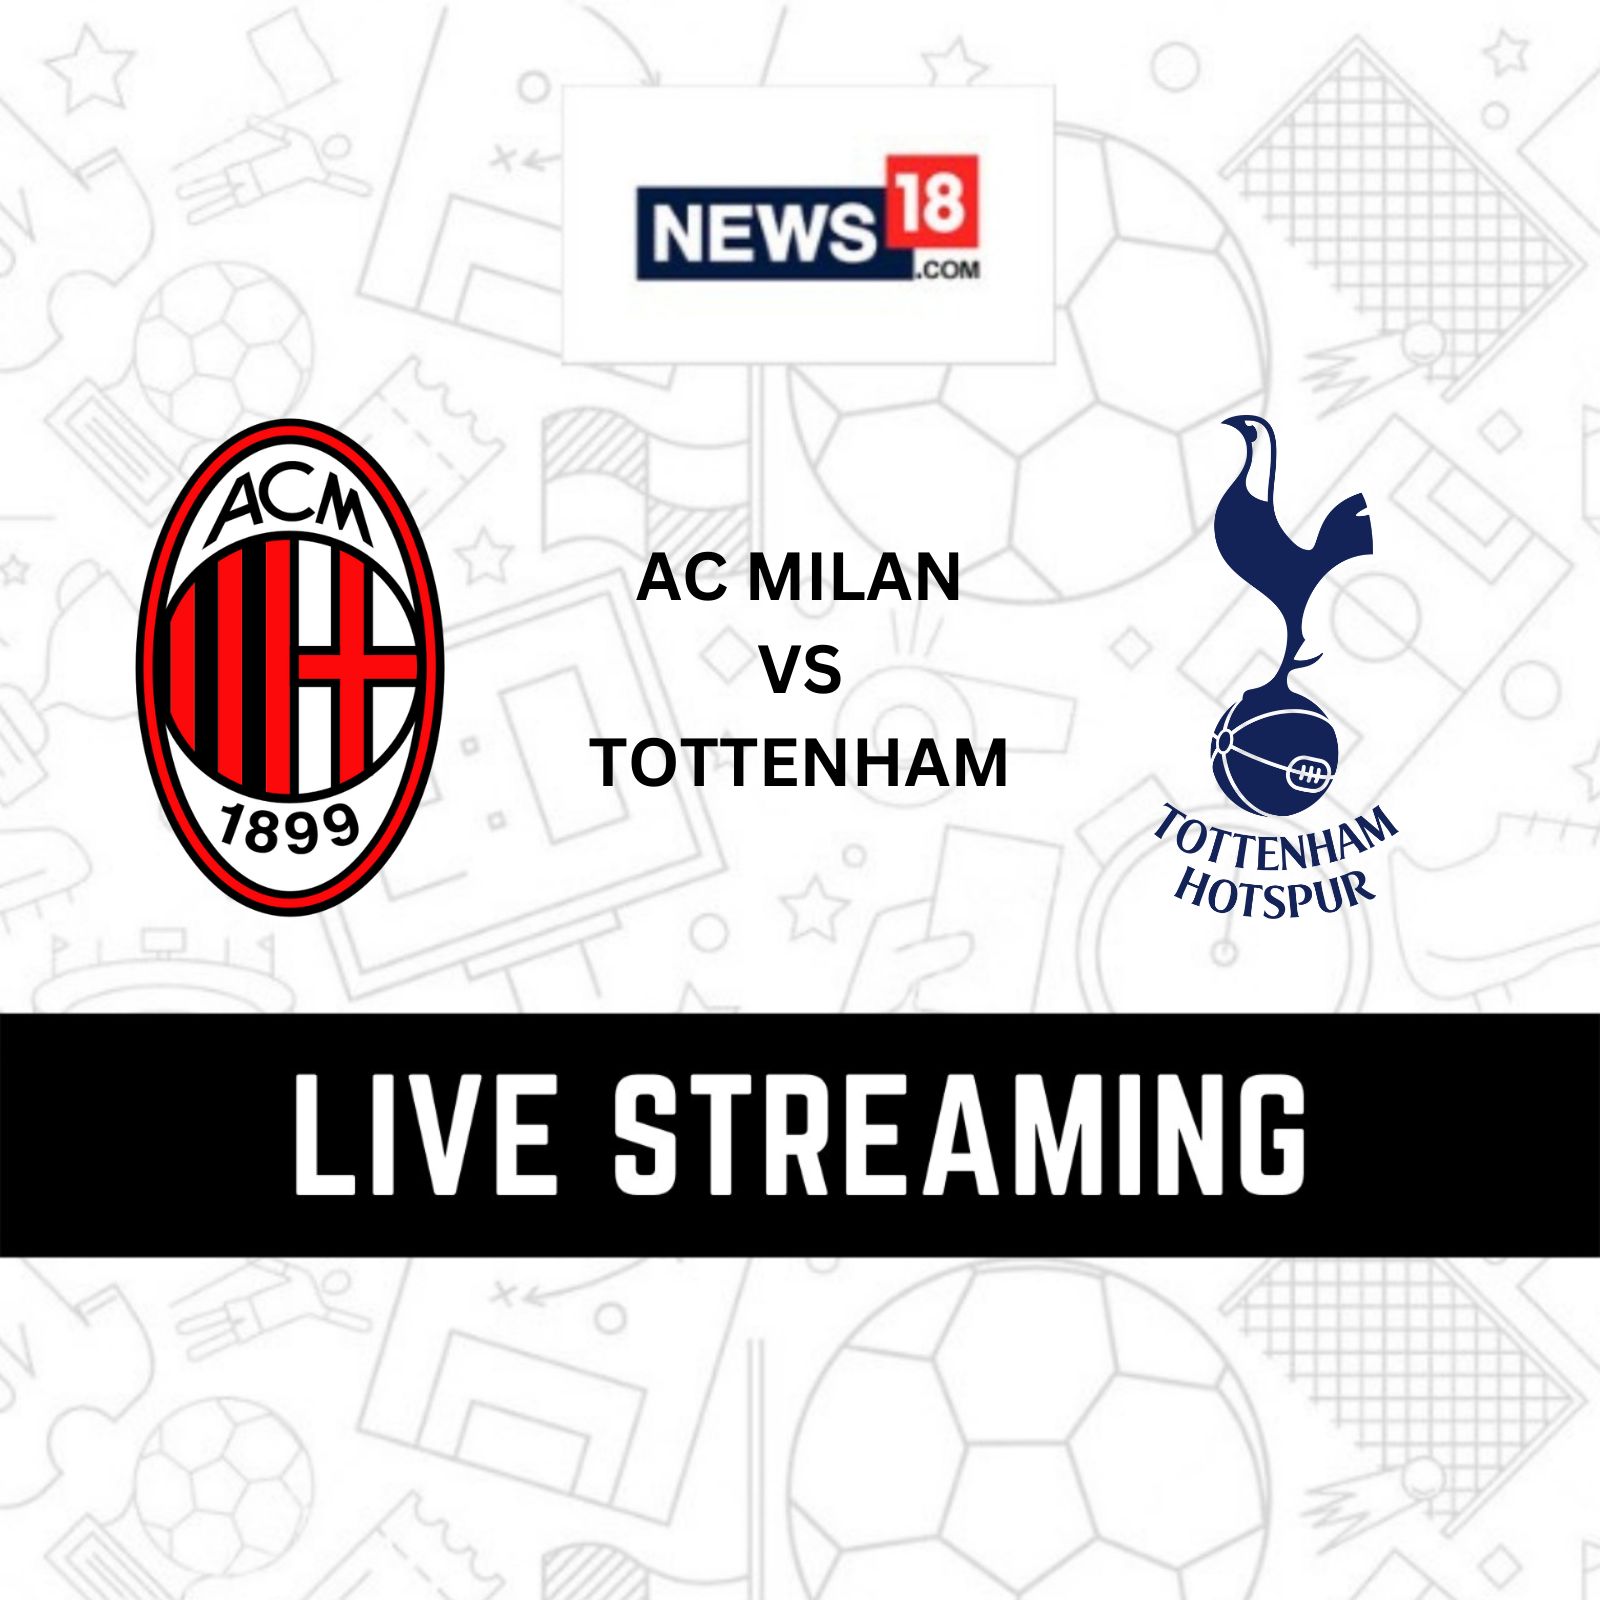 AC Milan vs Tottenham Hotspur UEFA Champions League Live Streaming When and Where to Watch AC Milan vs Tottenham Hotspur Live?